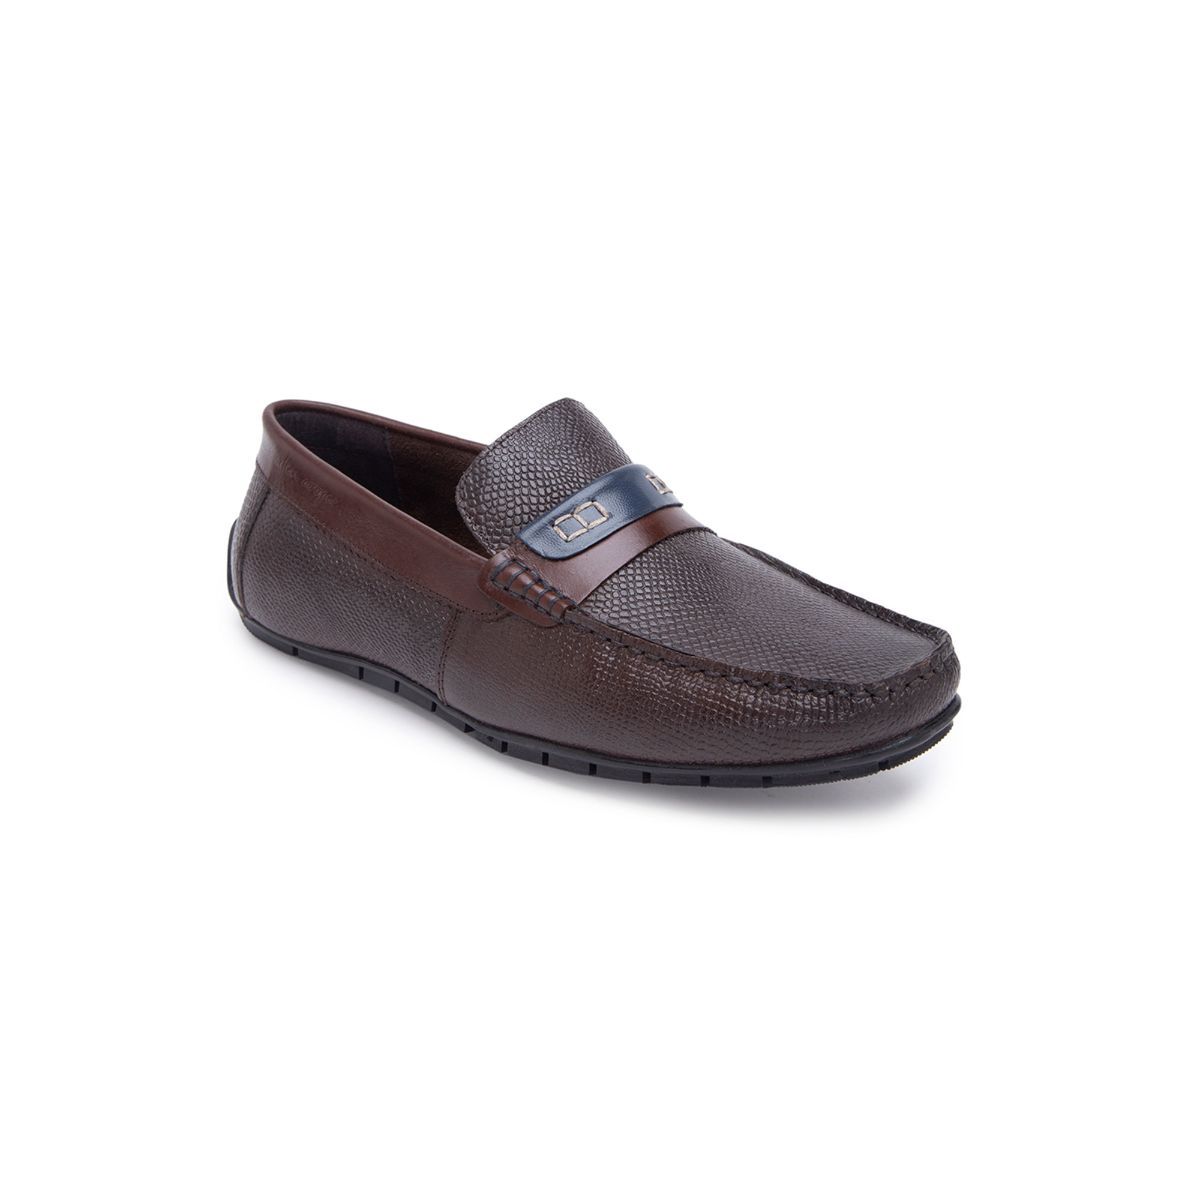 Allen Cooper Brown Leather Casual Shoes - 8